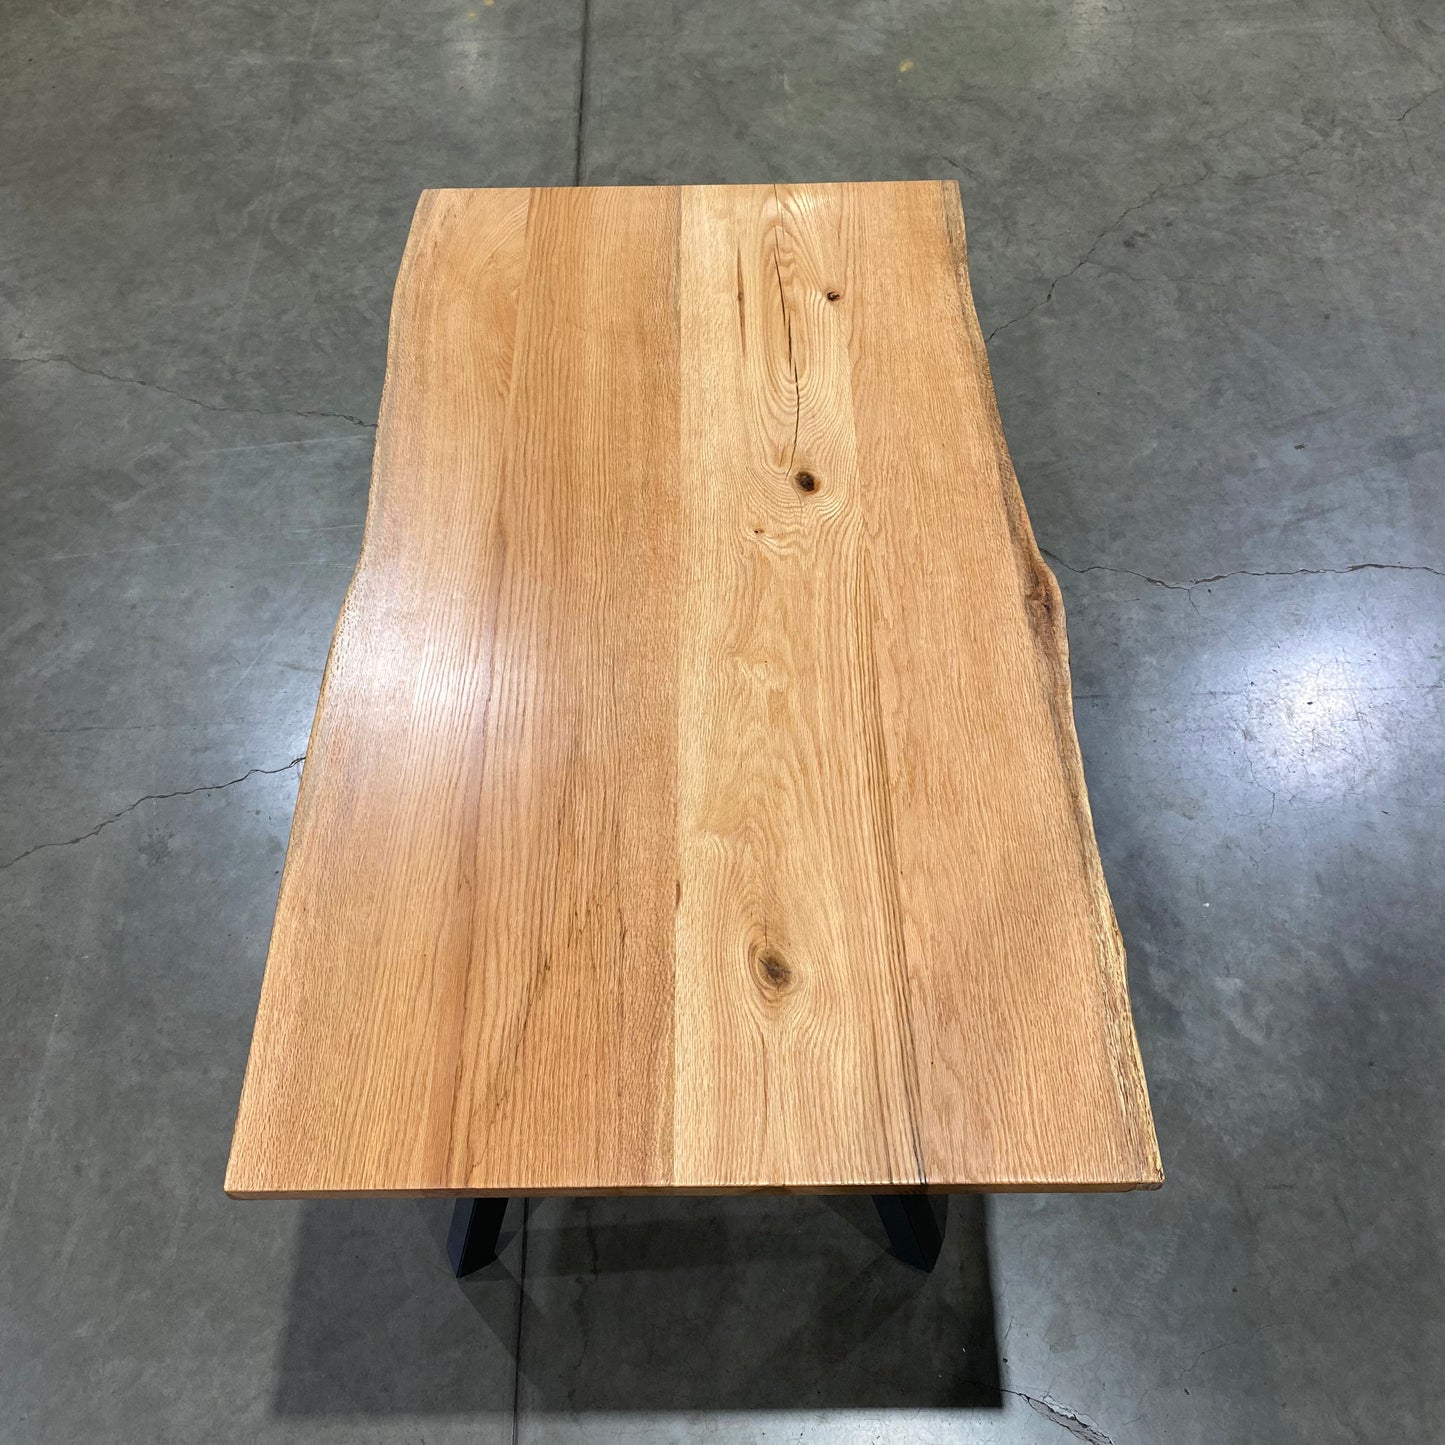 Double Live Edge Red Oak Table